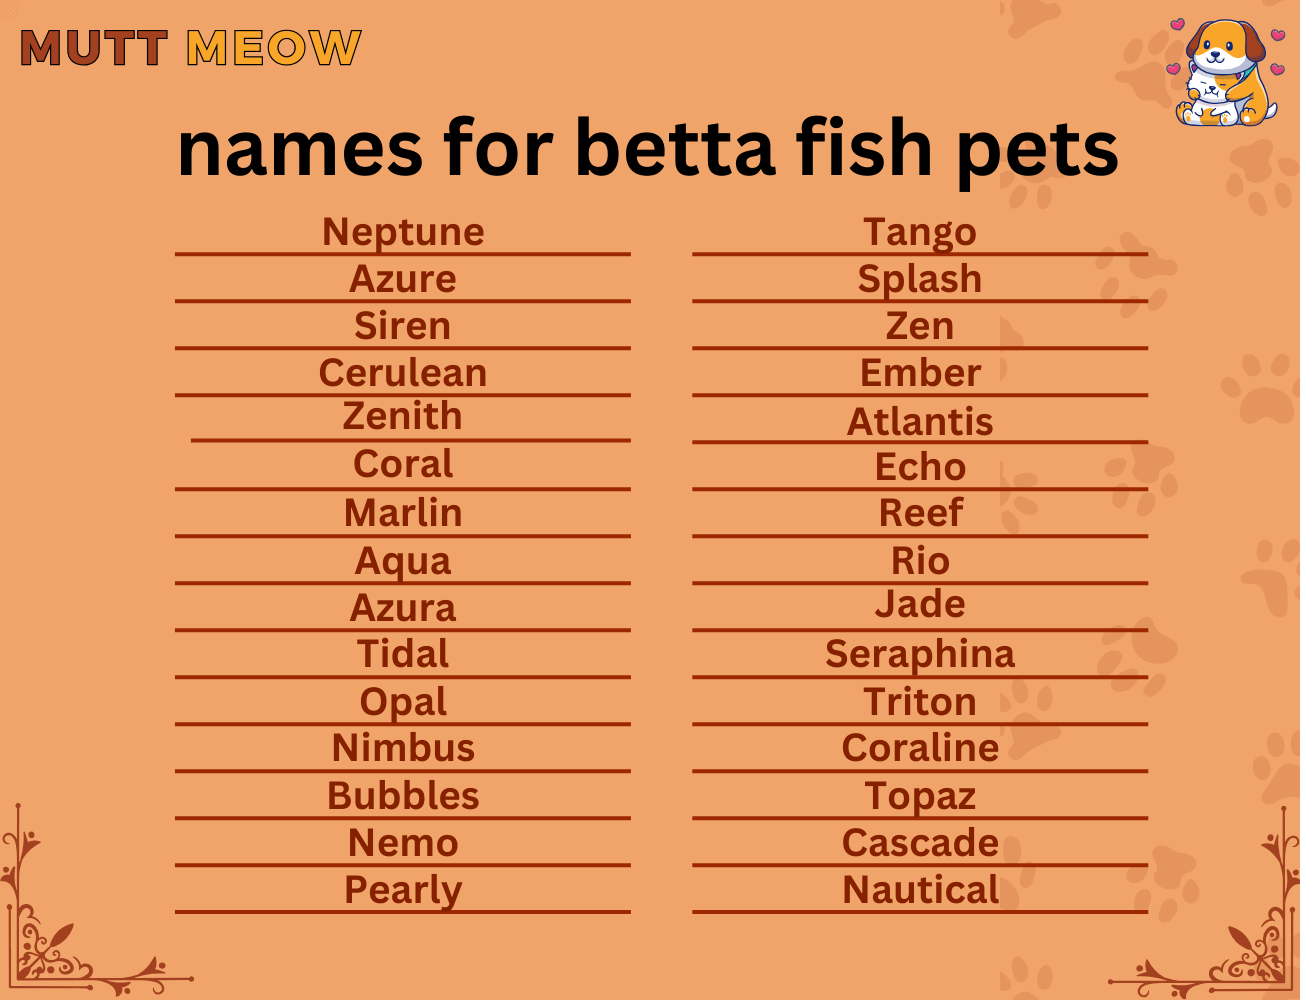 names for betta fish pets